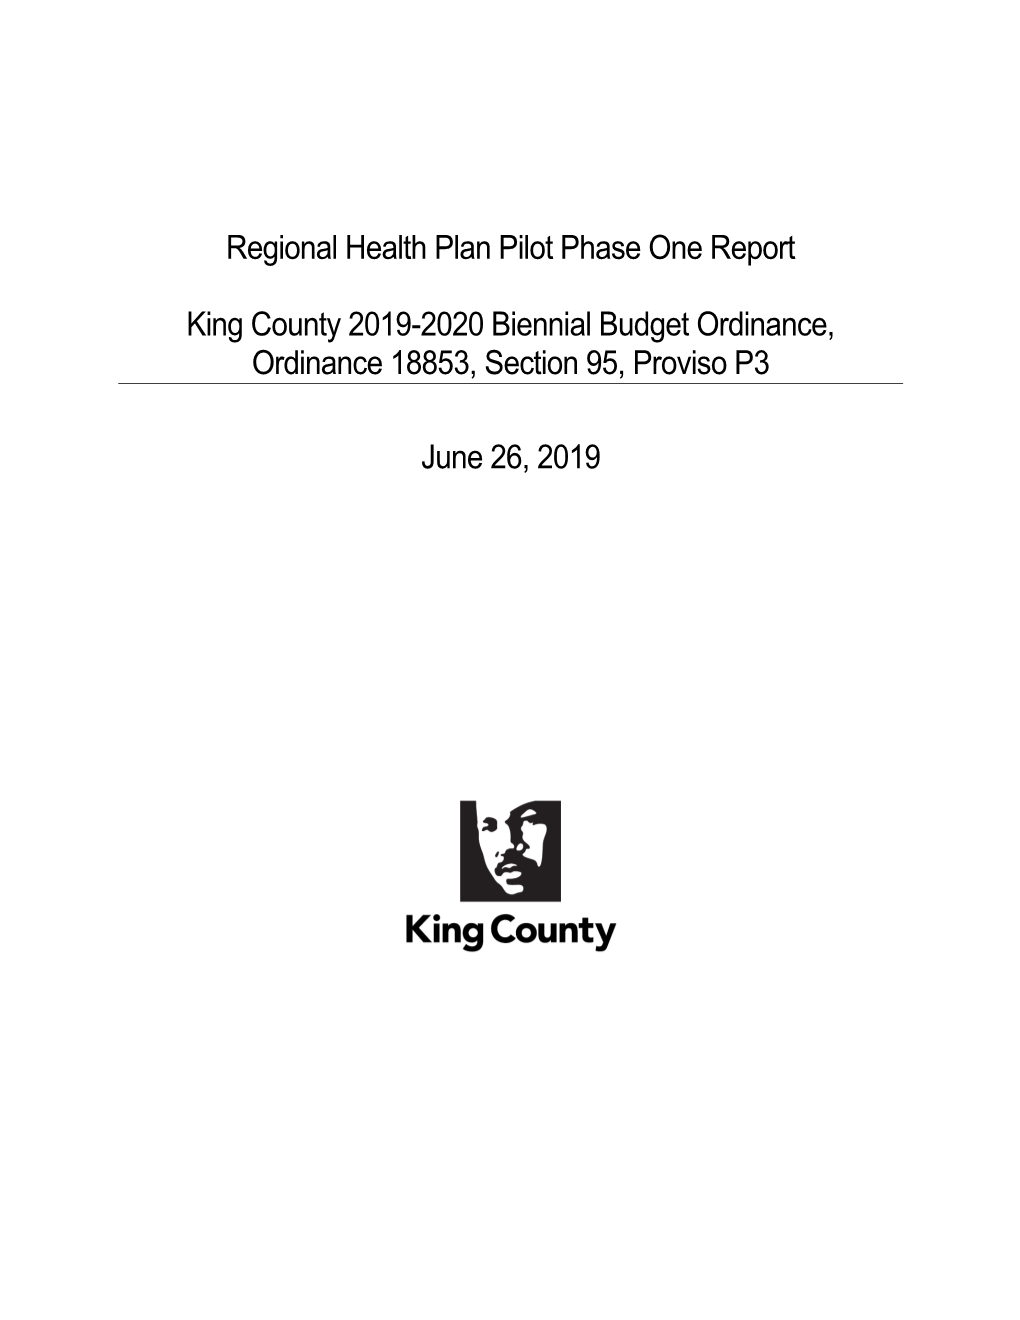 Regional Health Plan Pilot Phase One Report King County 2019-2020